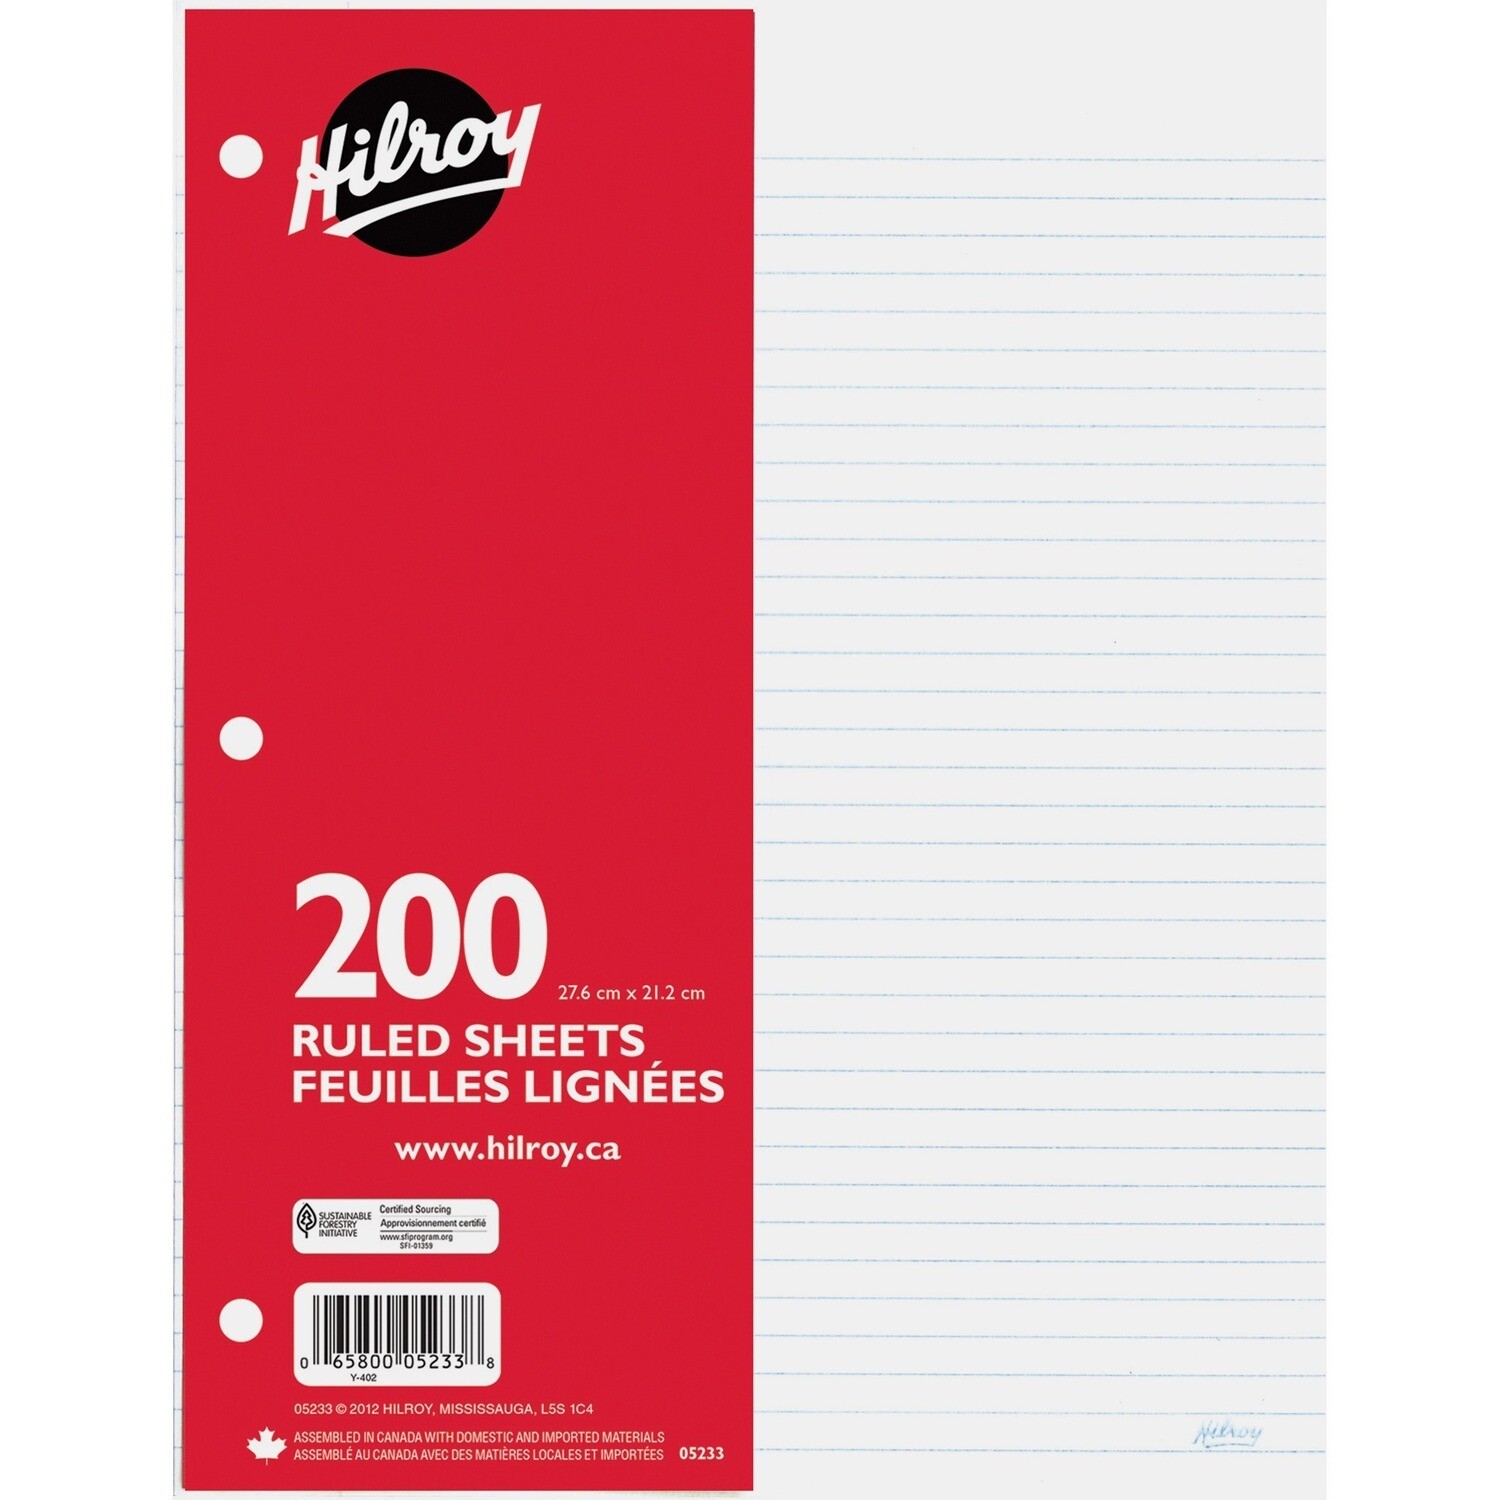 Paper, Ruled Loose Leaf 200 Sheets, 3 Hole Punched, Hilroy